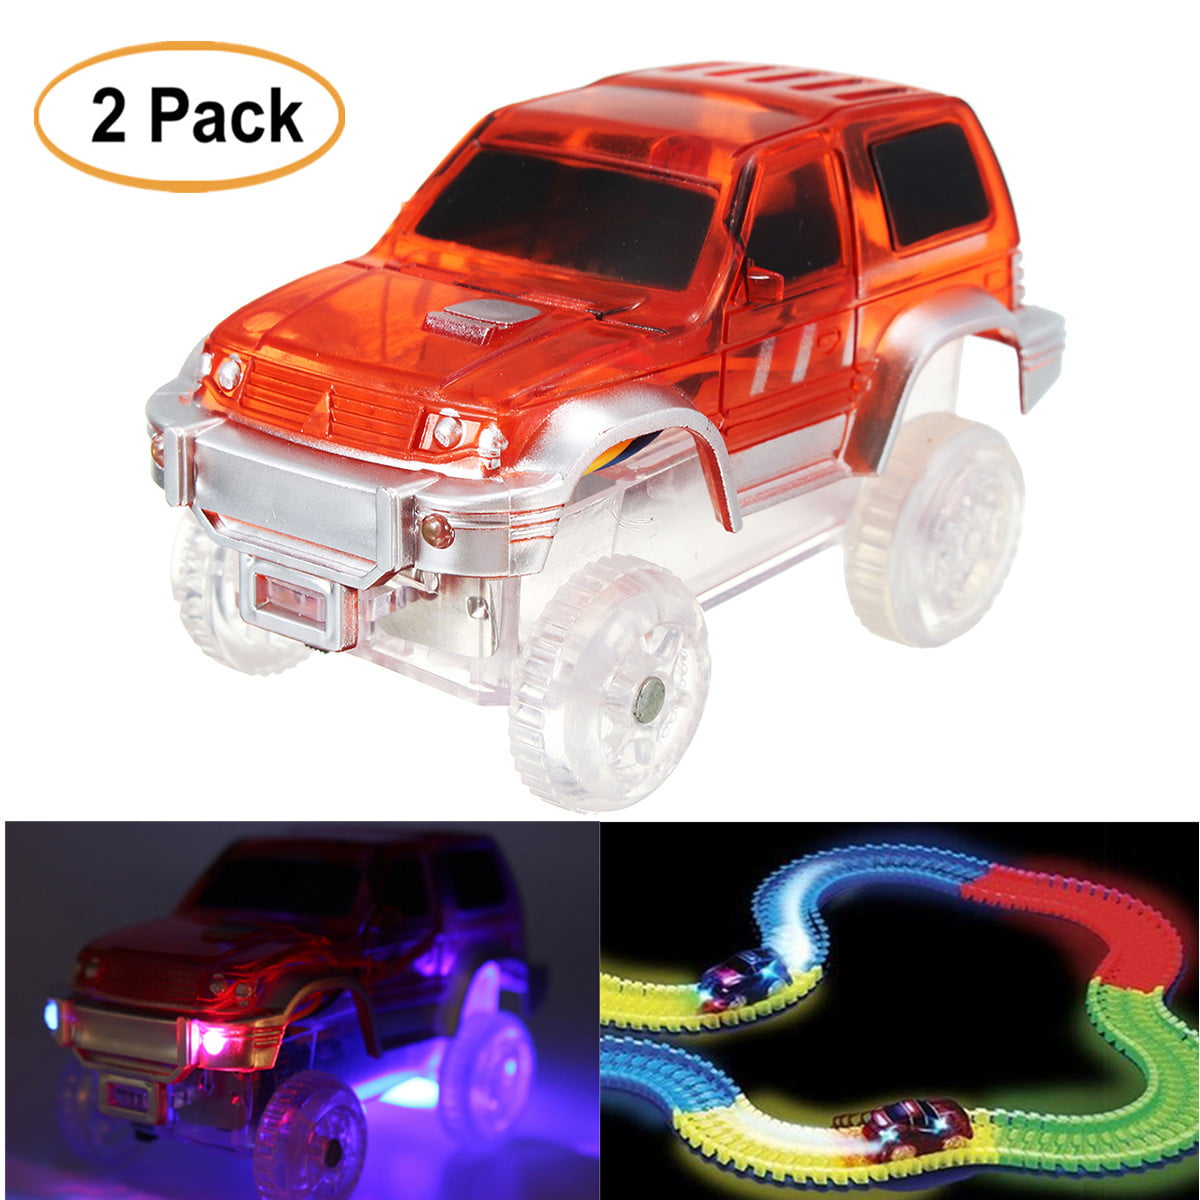 3 Pack Replacement Magic Track Car Toys For KidsLight Up Toy Cars With 5 LED Fla 